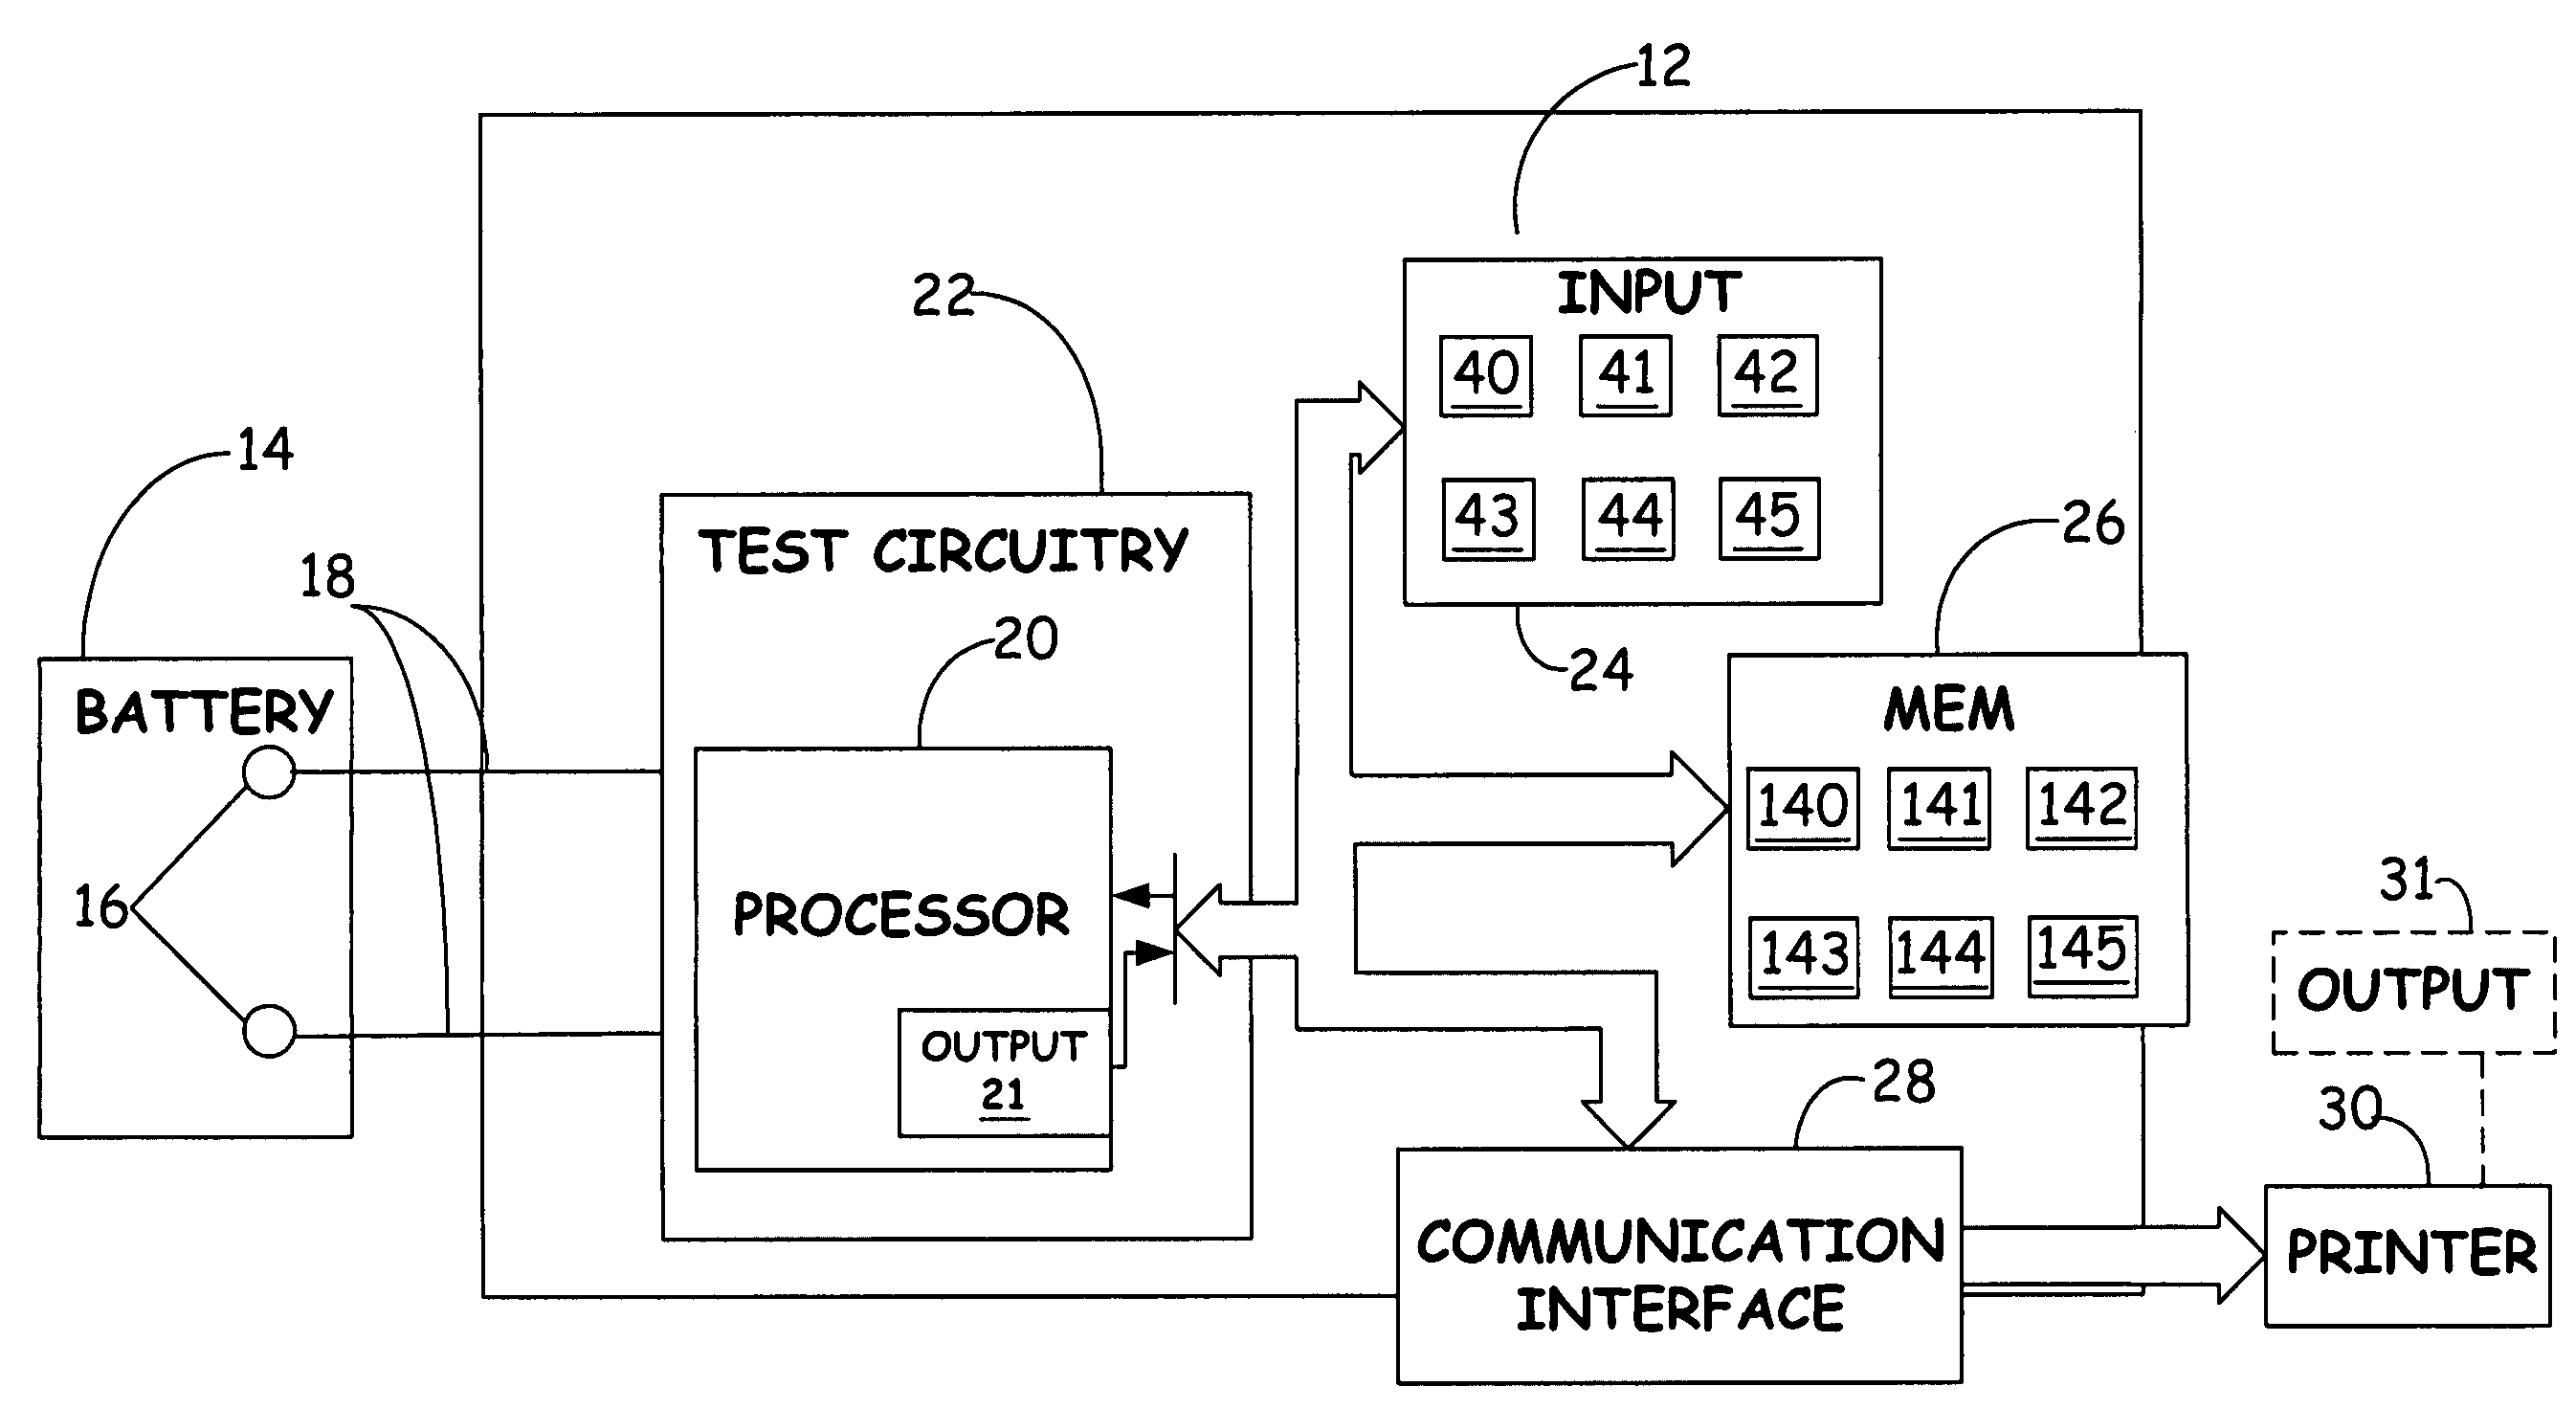 Electronic battery tester having a user interface to configure a printer